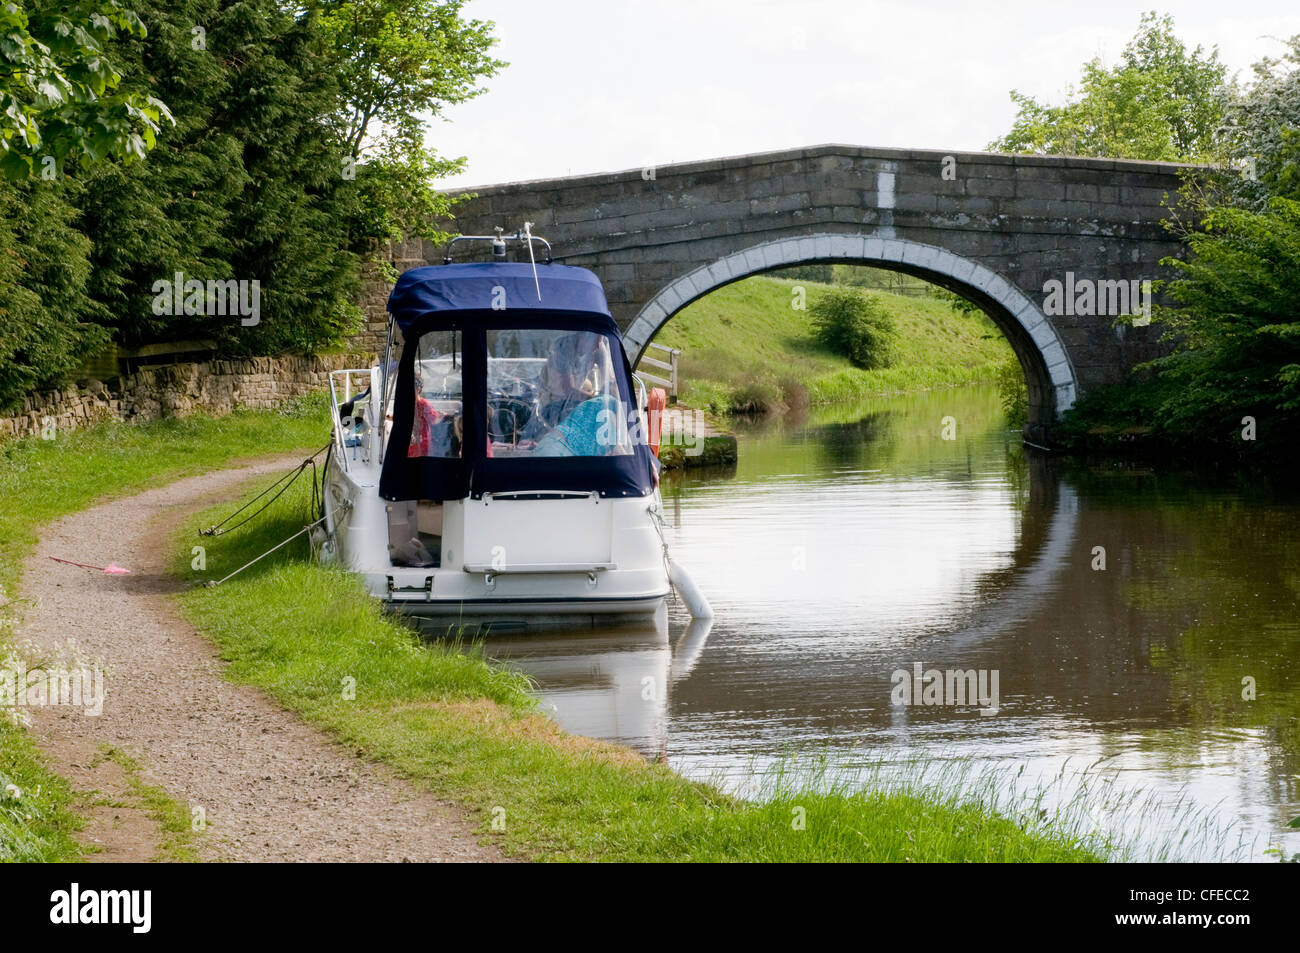 Pleasure cruiser (boat) moored in scenic rural area by small stone bridge on banks of Leeds Liverpool Canal - Gargrave, North Yorkshire, England, UK. Stock Photo